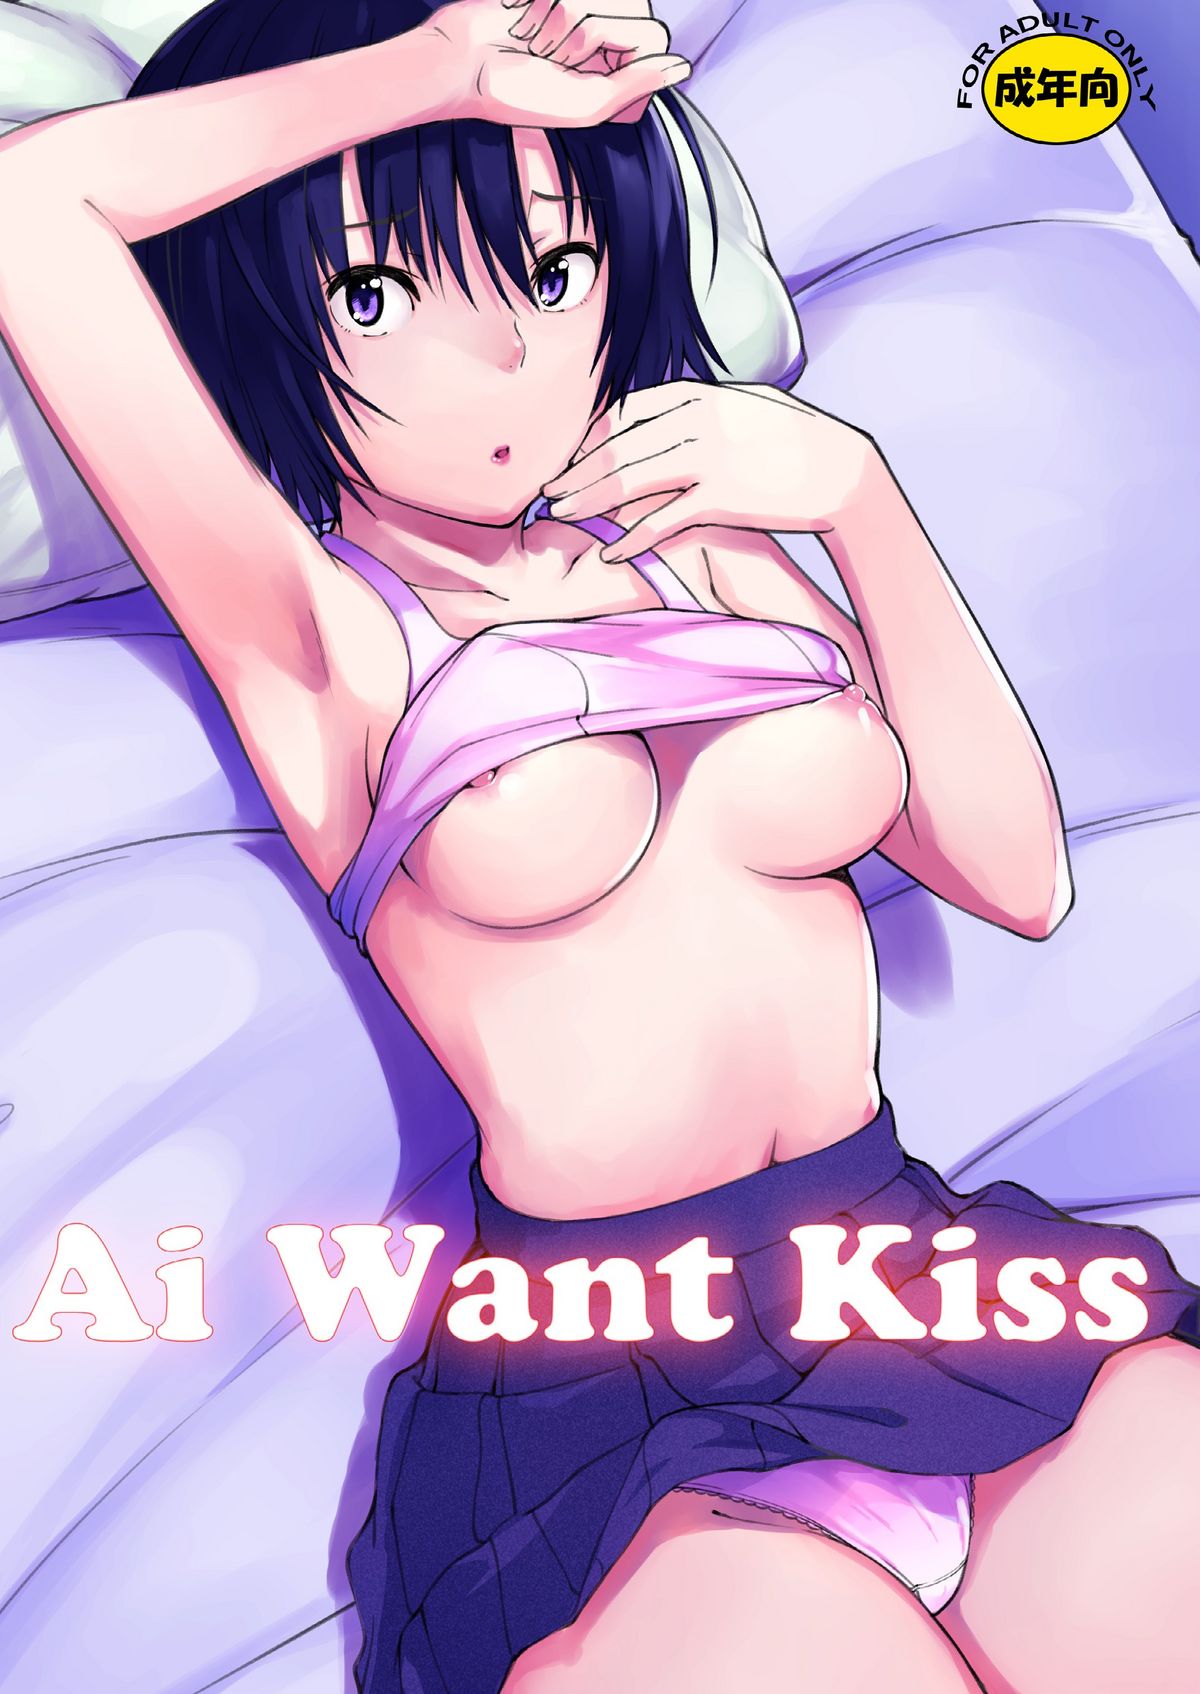 [Pillow Works (Oboro)] Ai Want Kiss (Amagami) [Digital] page 1 full